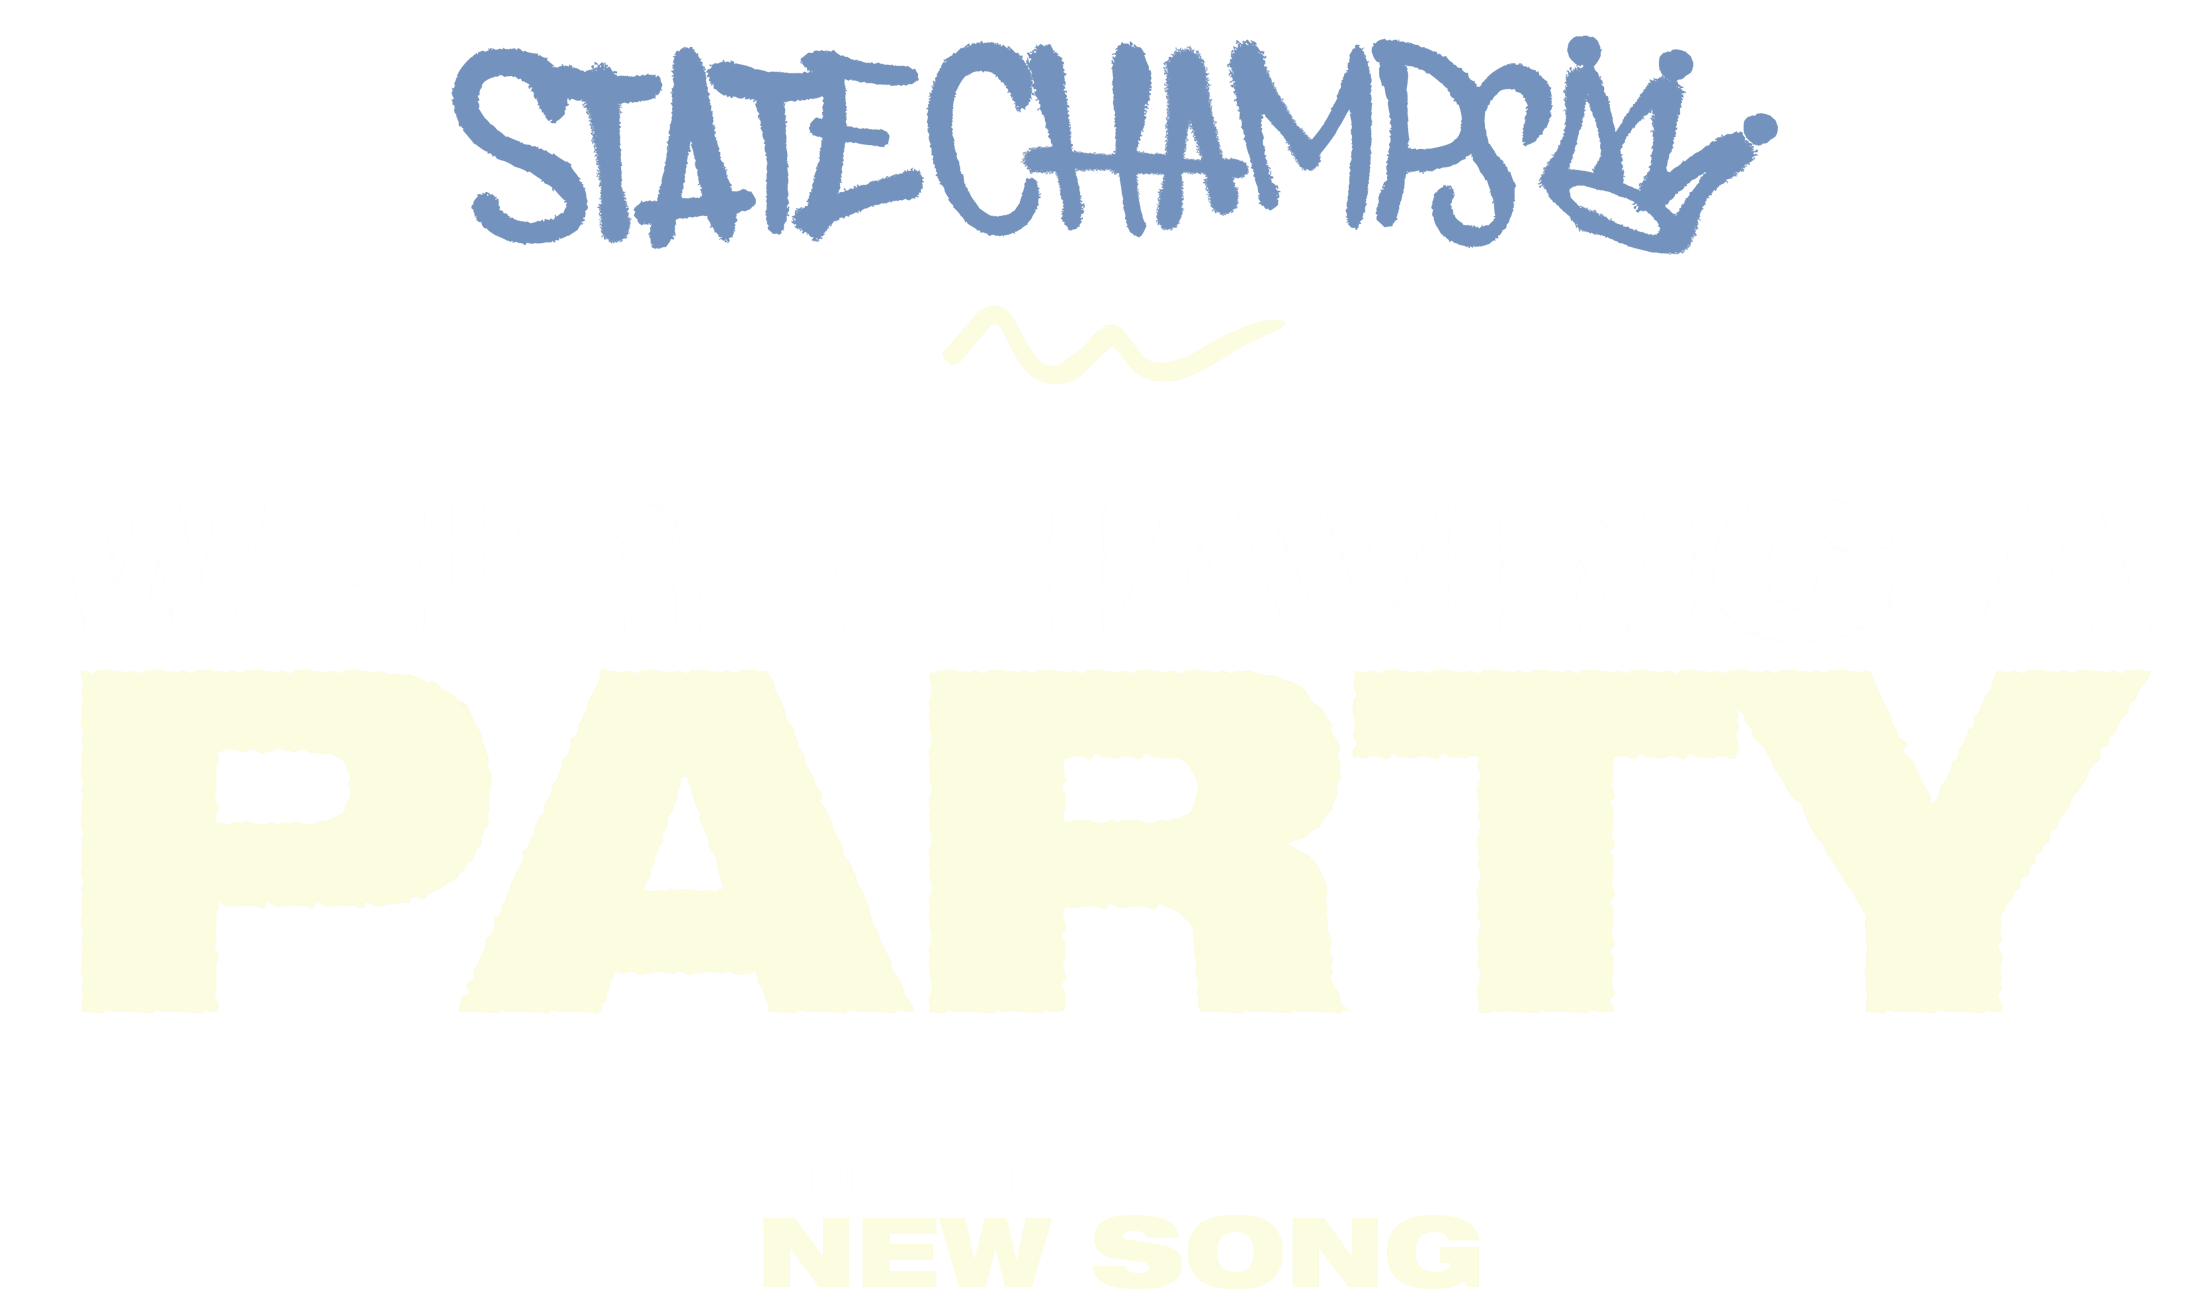 State Champs is throwing a party